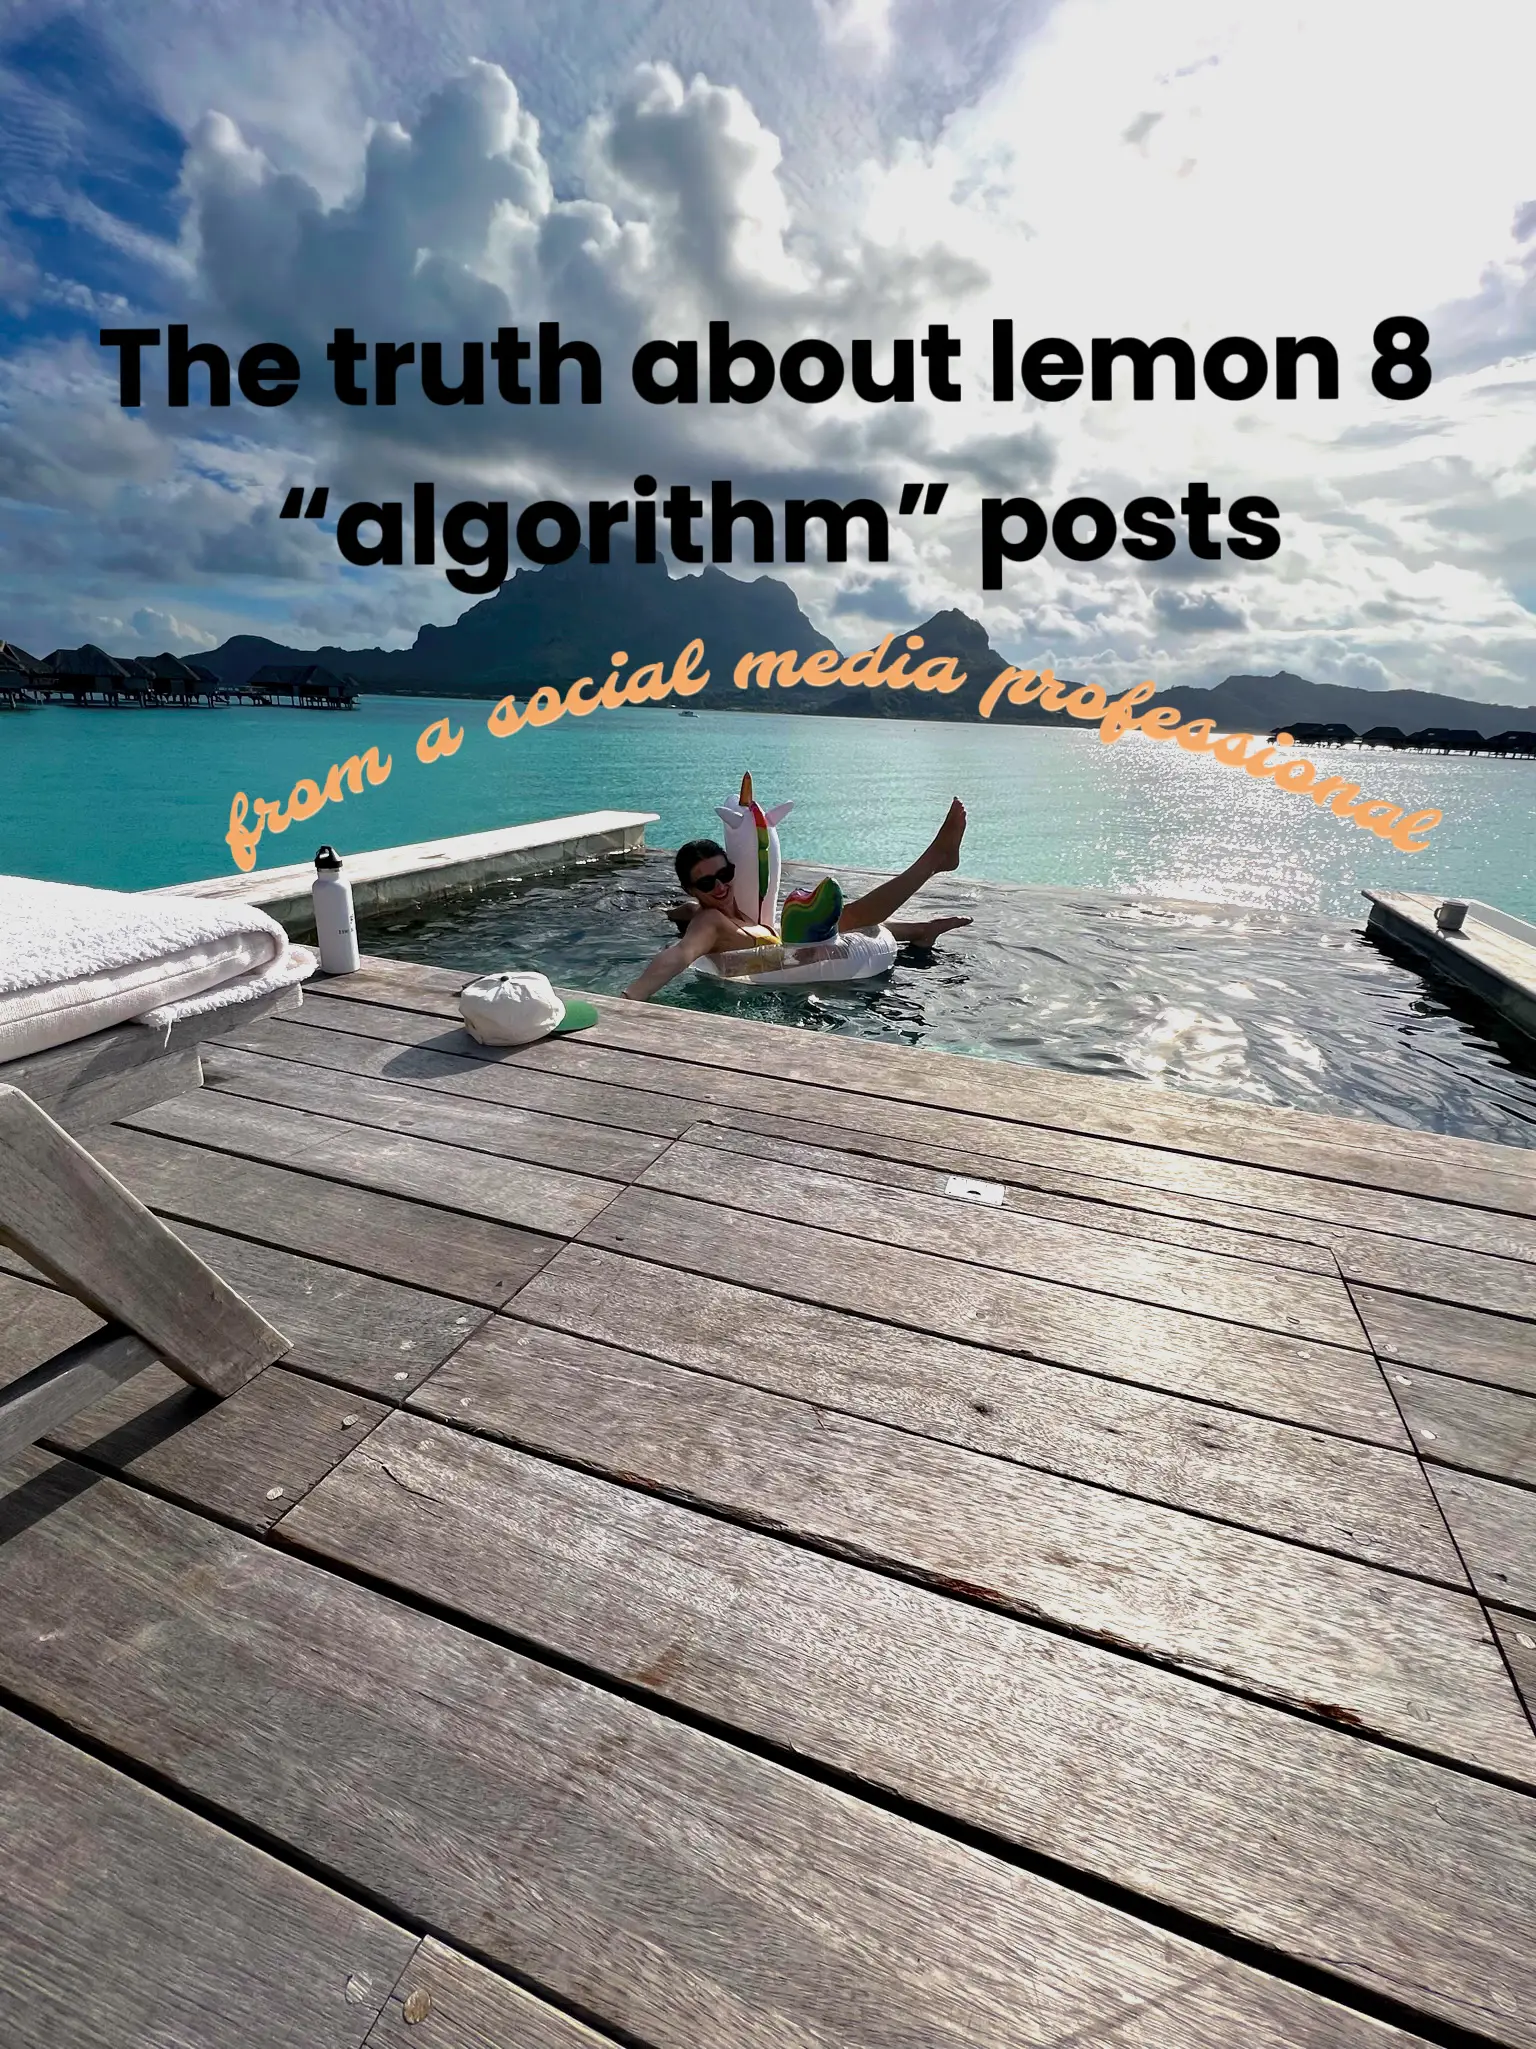 no one knows the algorithm of 🍋's images